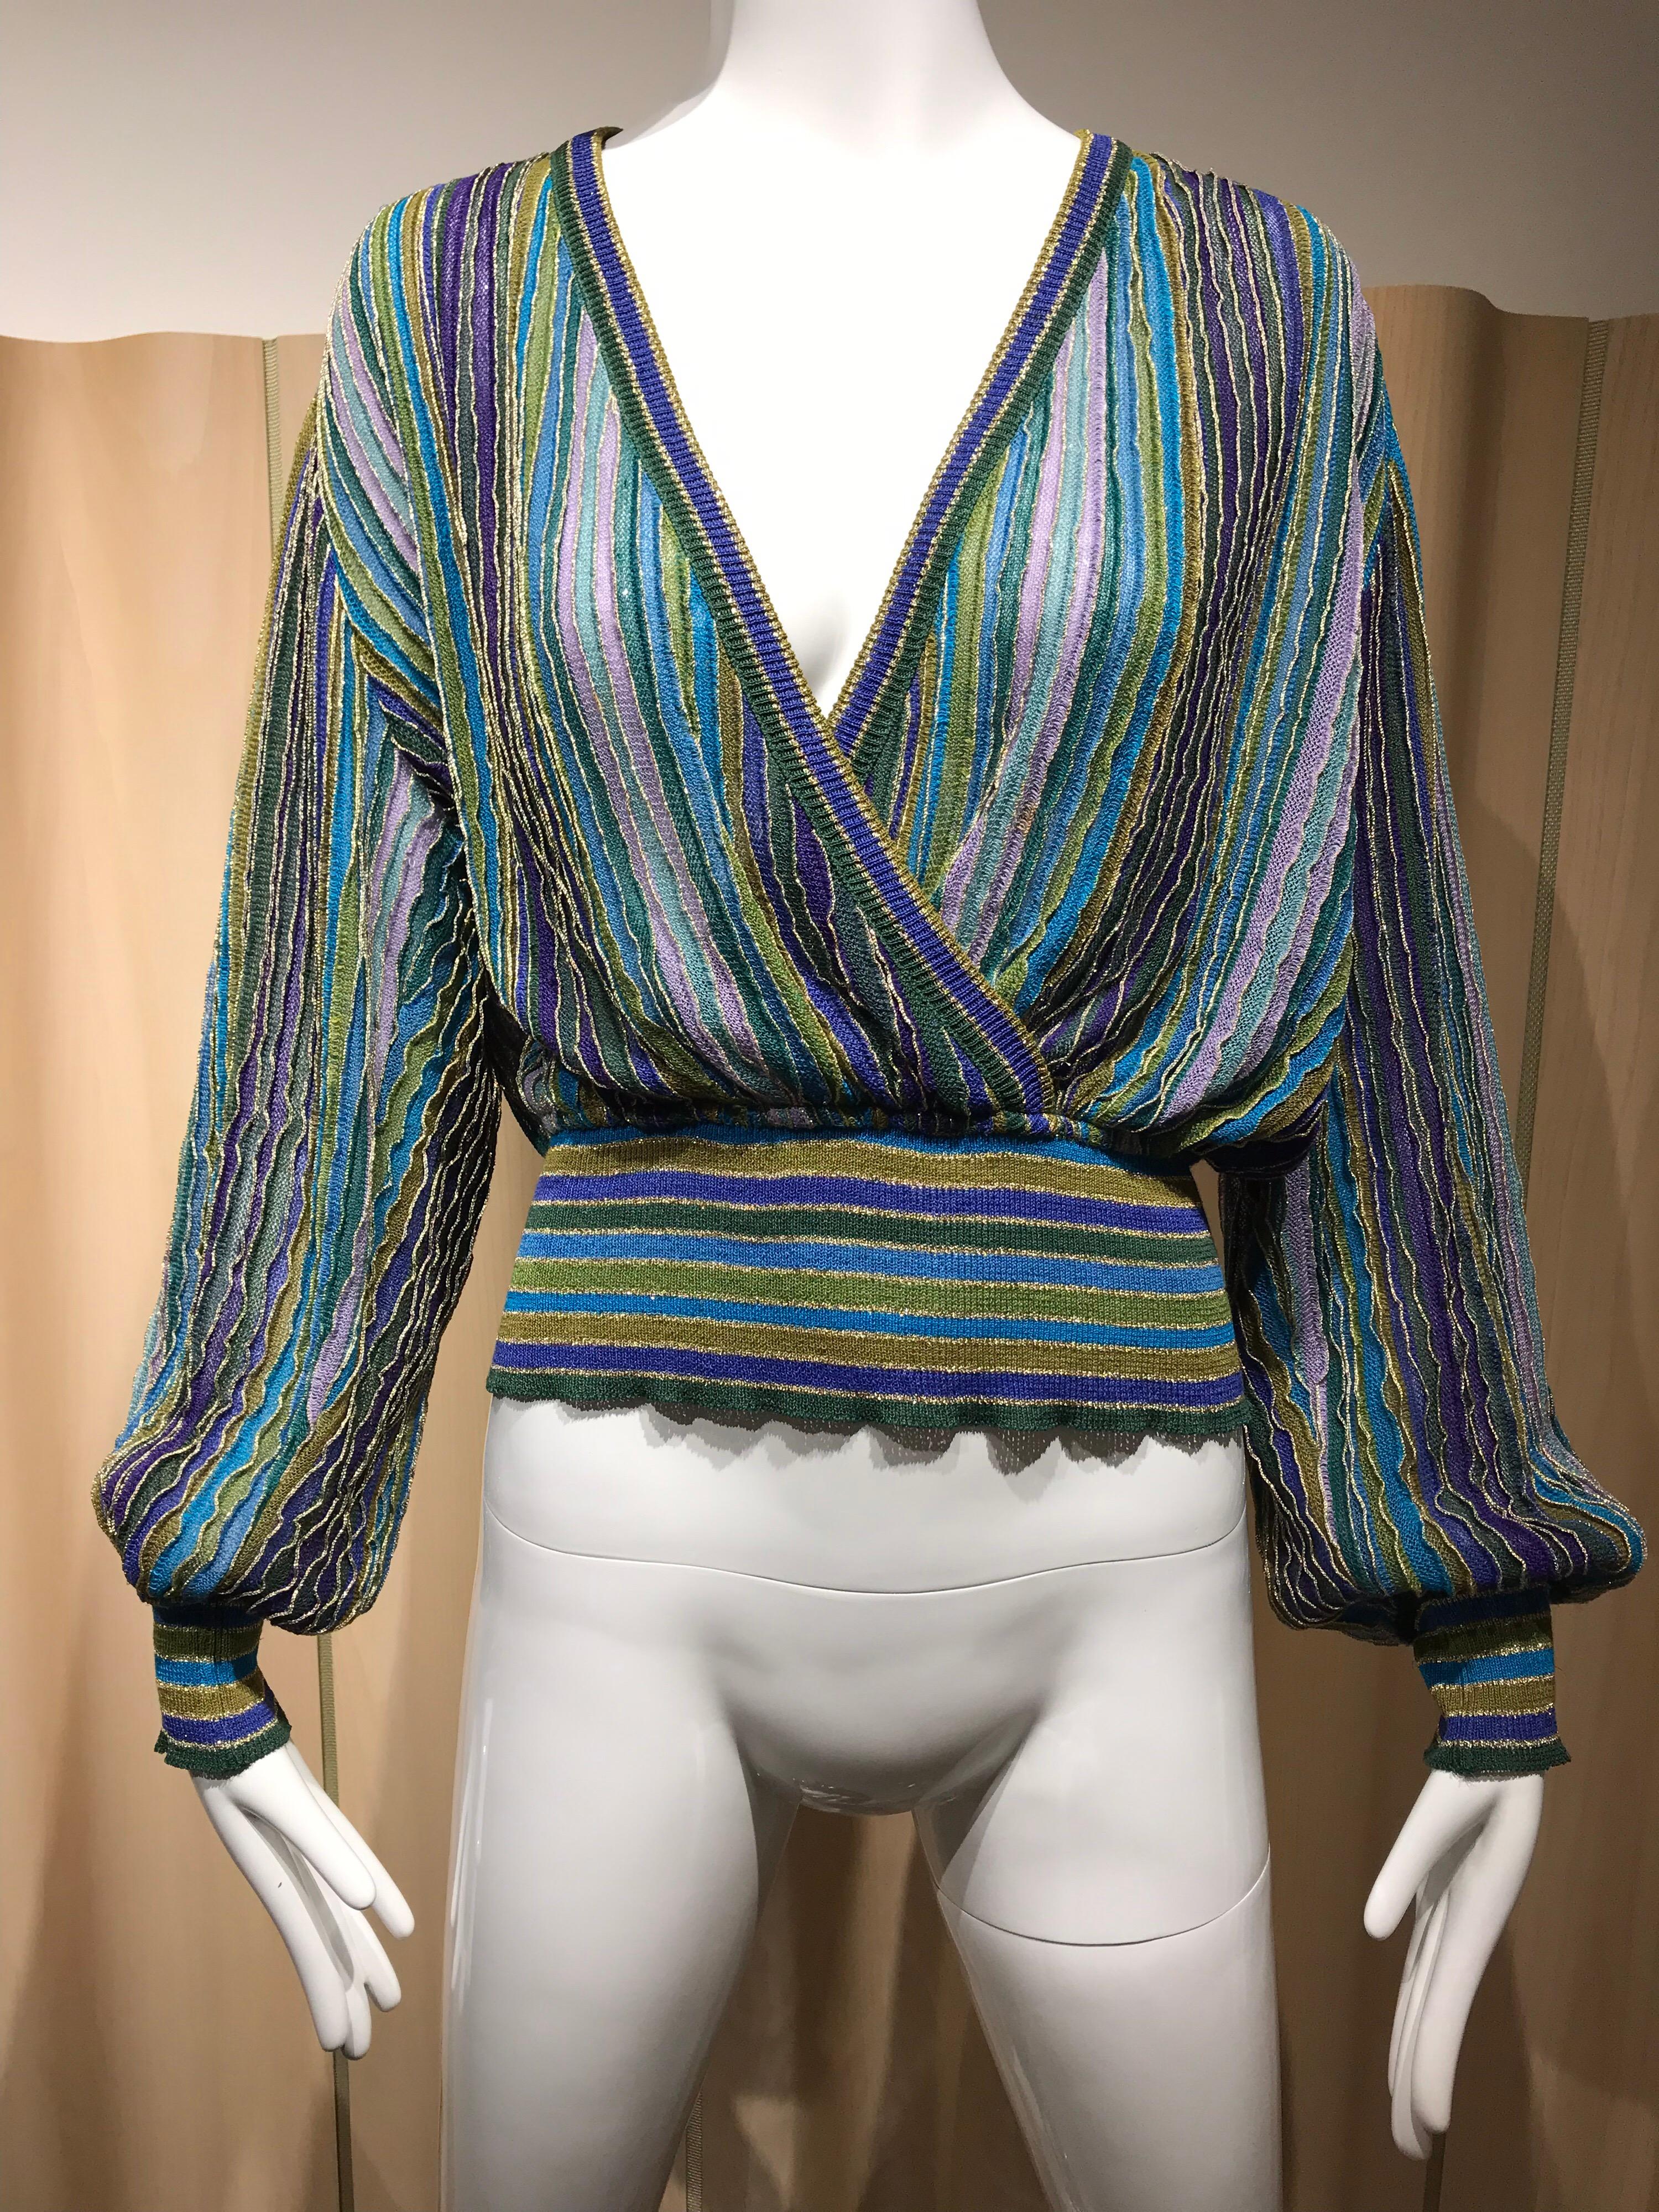  1980s Missoni Teal blue and Purple Metallic Knit Long Sleeve Top and Skirt set.
Long Sleeve V Neck Sweater knit top with elastic waist and Wrap Skirt.
Fit size 6/8
Top Measurement: Bust: 44 / Waist 26 inch  stretch to 32 / Sleeve : 24 inch
Skirt